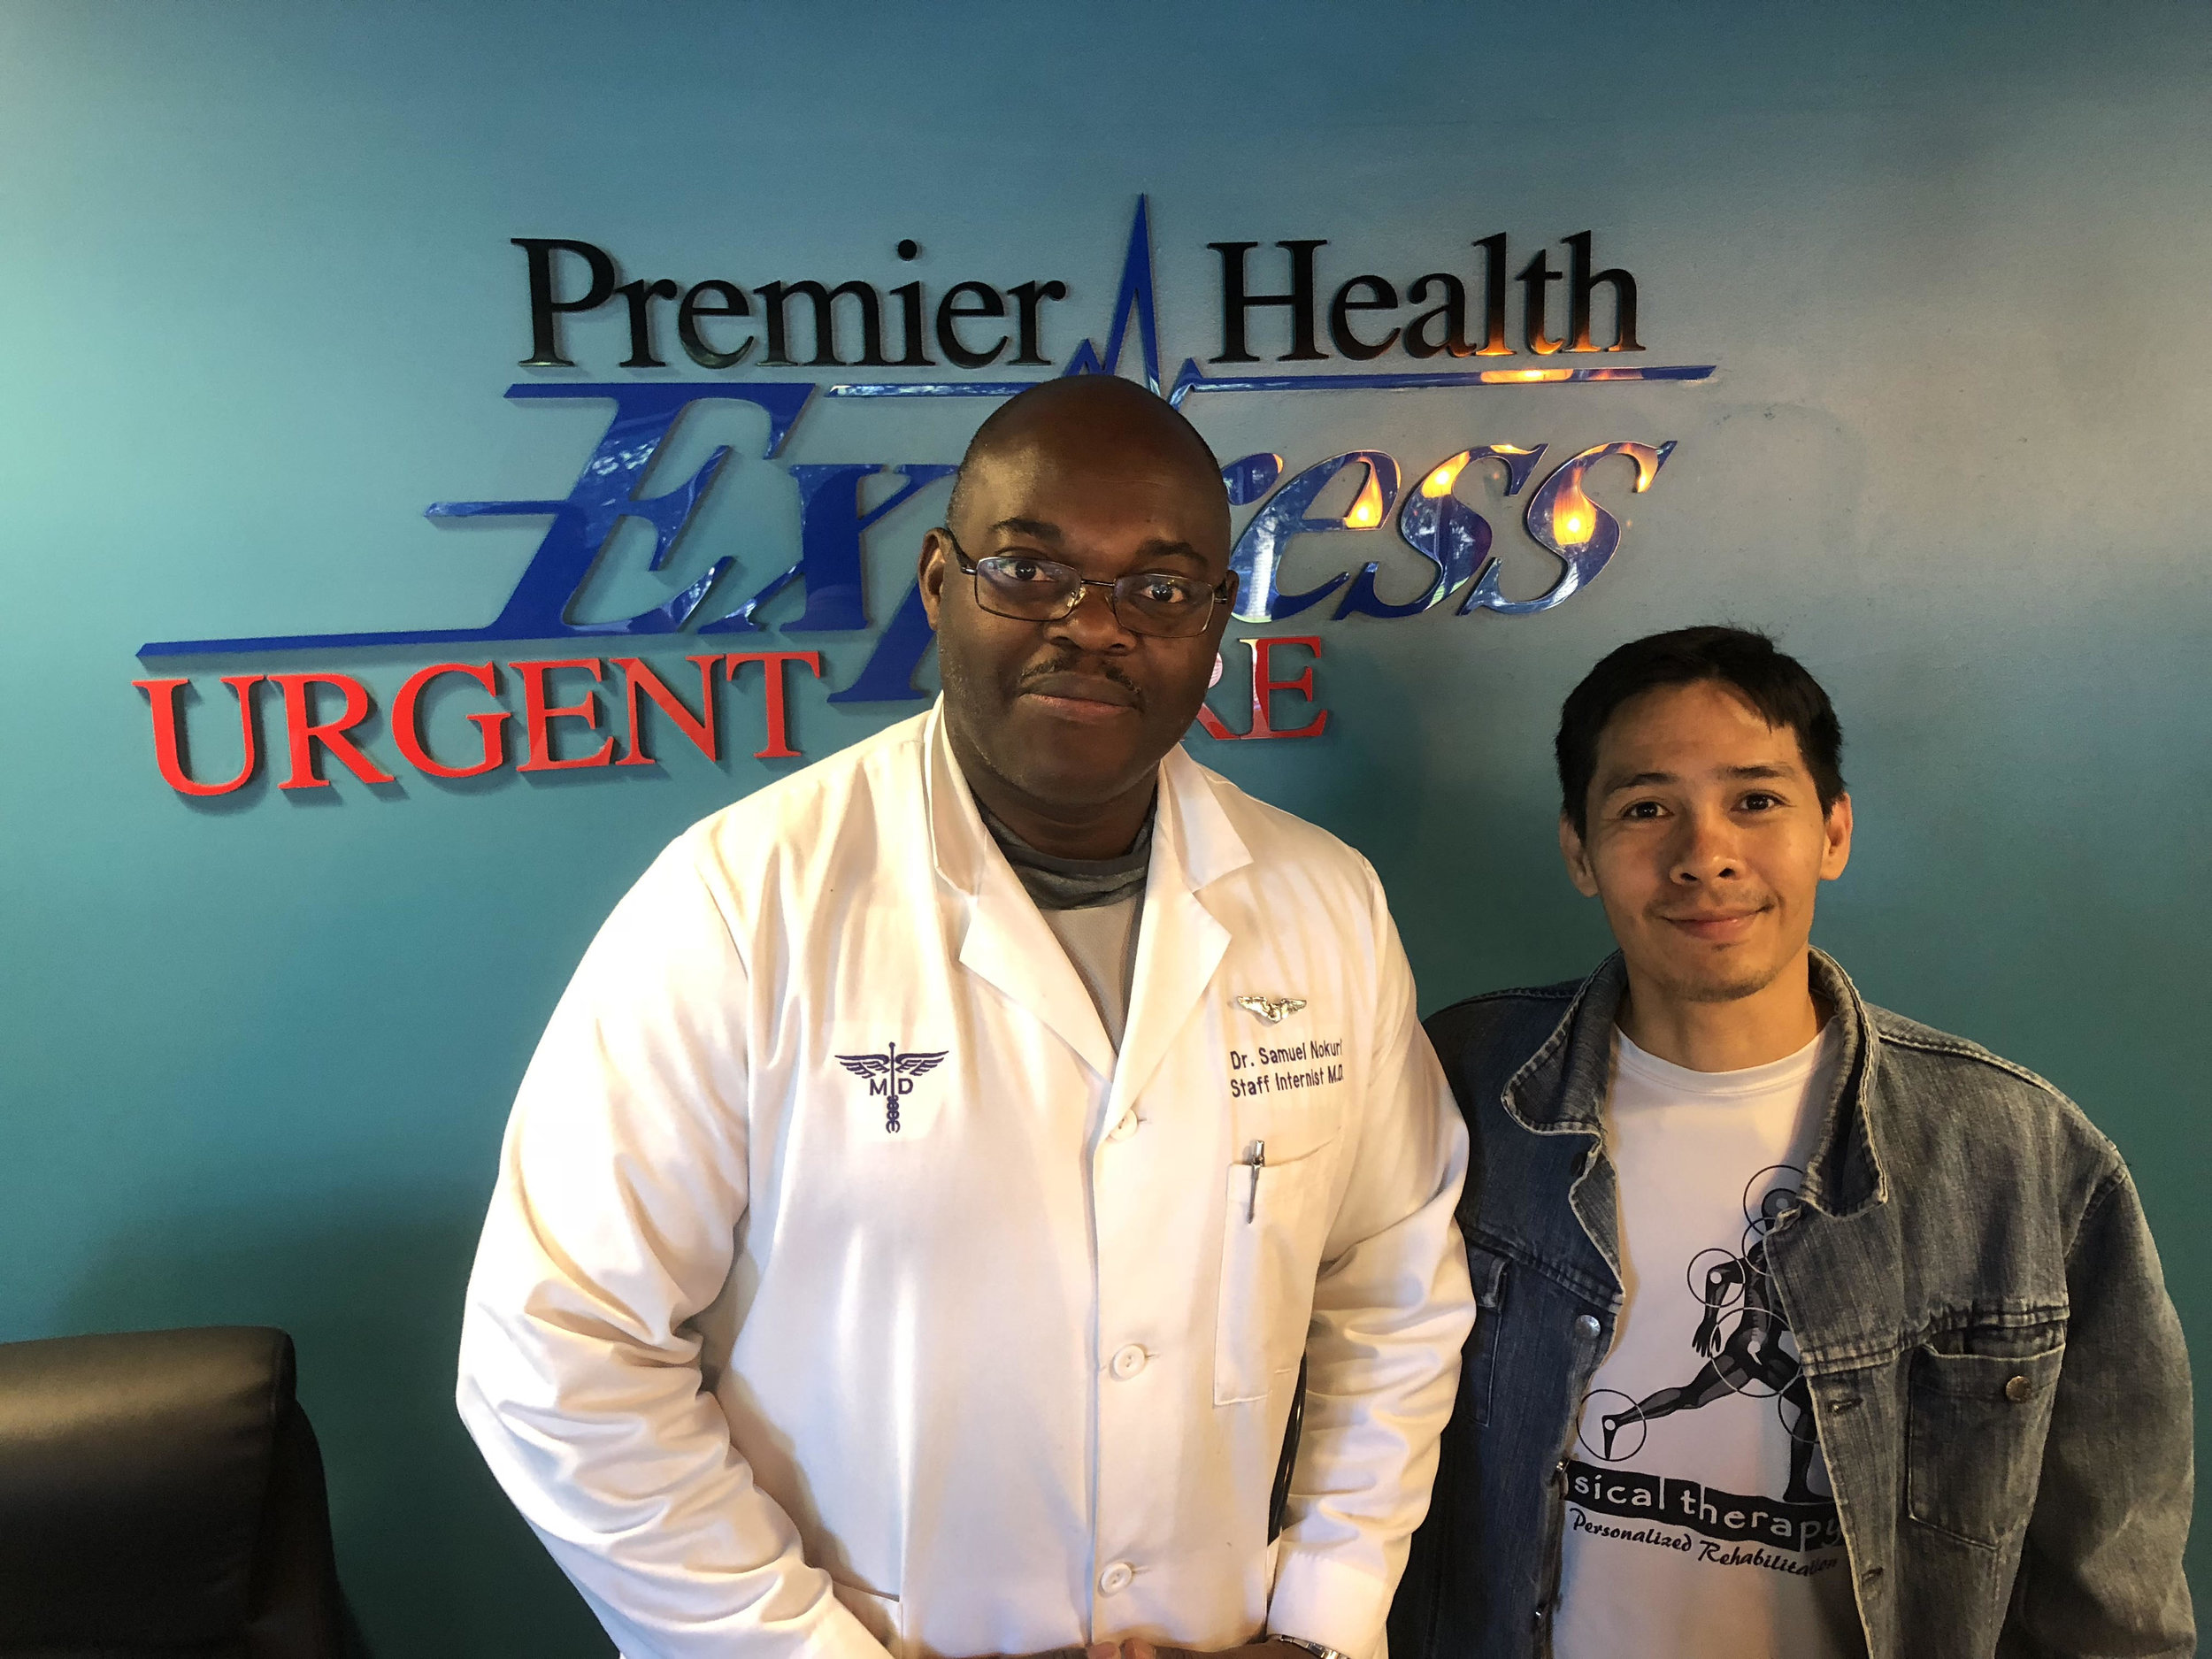 Dr Nokuri Premier Health Express Urgent Care and Primary Care Physician Best Internist and AAA PT Top Rated Columbia Howard County MD.jpg